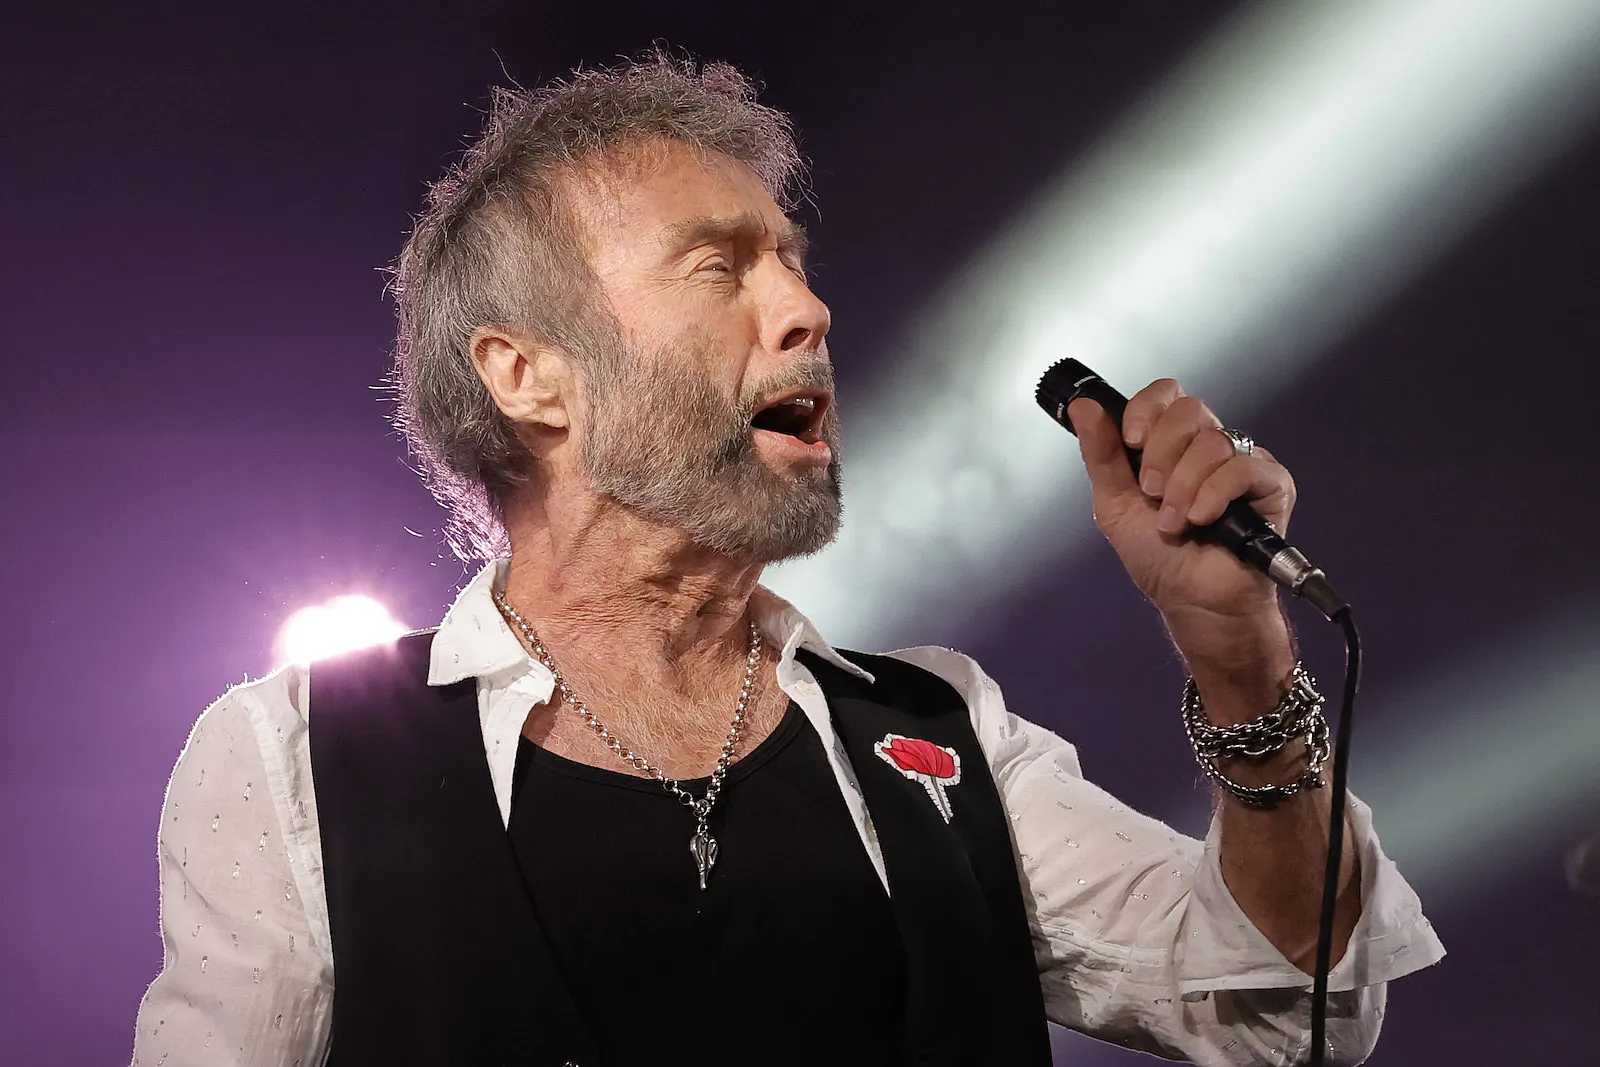 paul rodgers